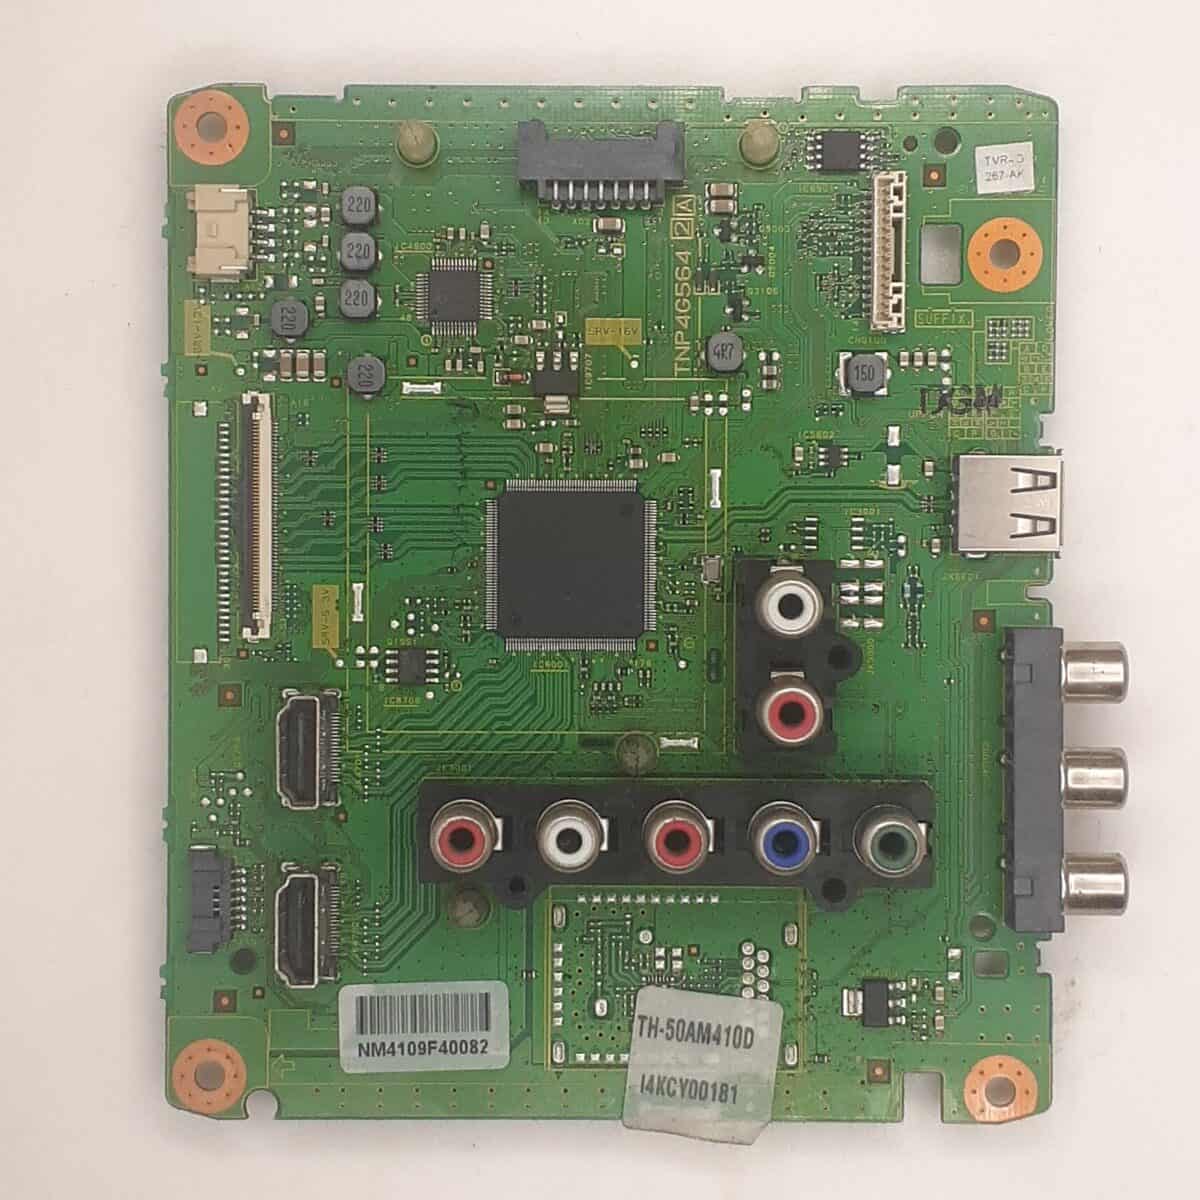 TH-50AM410D PANASONIC MOTHERBOARD FOR LED TV